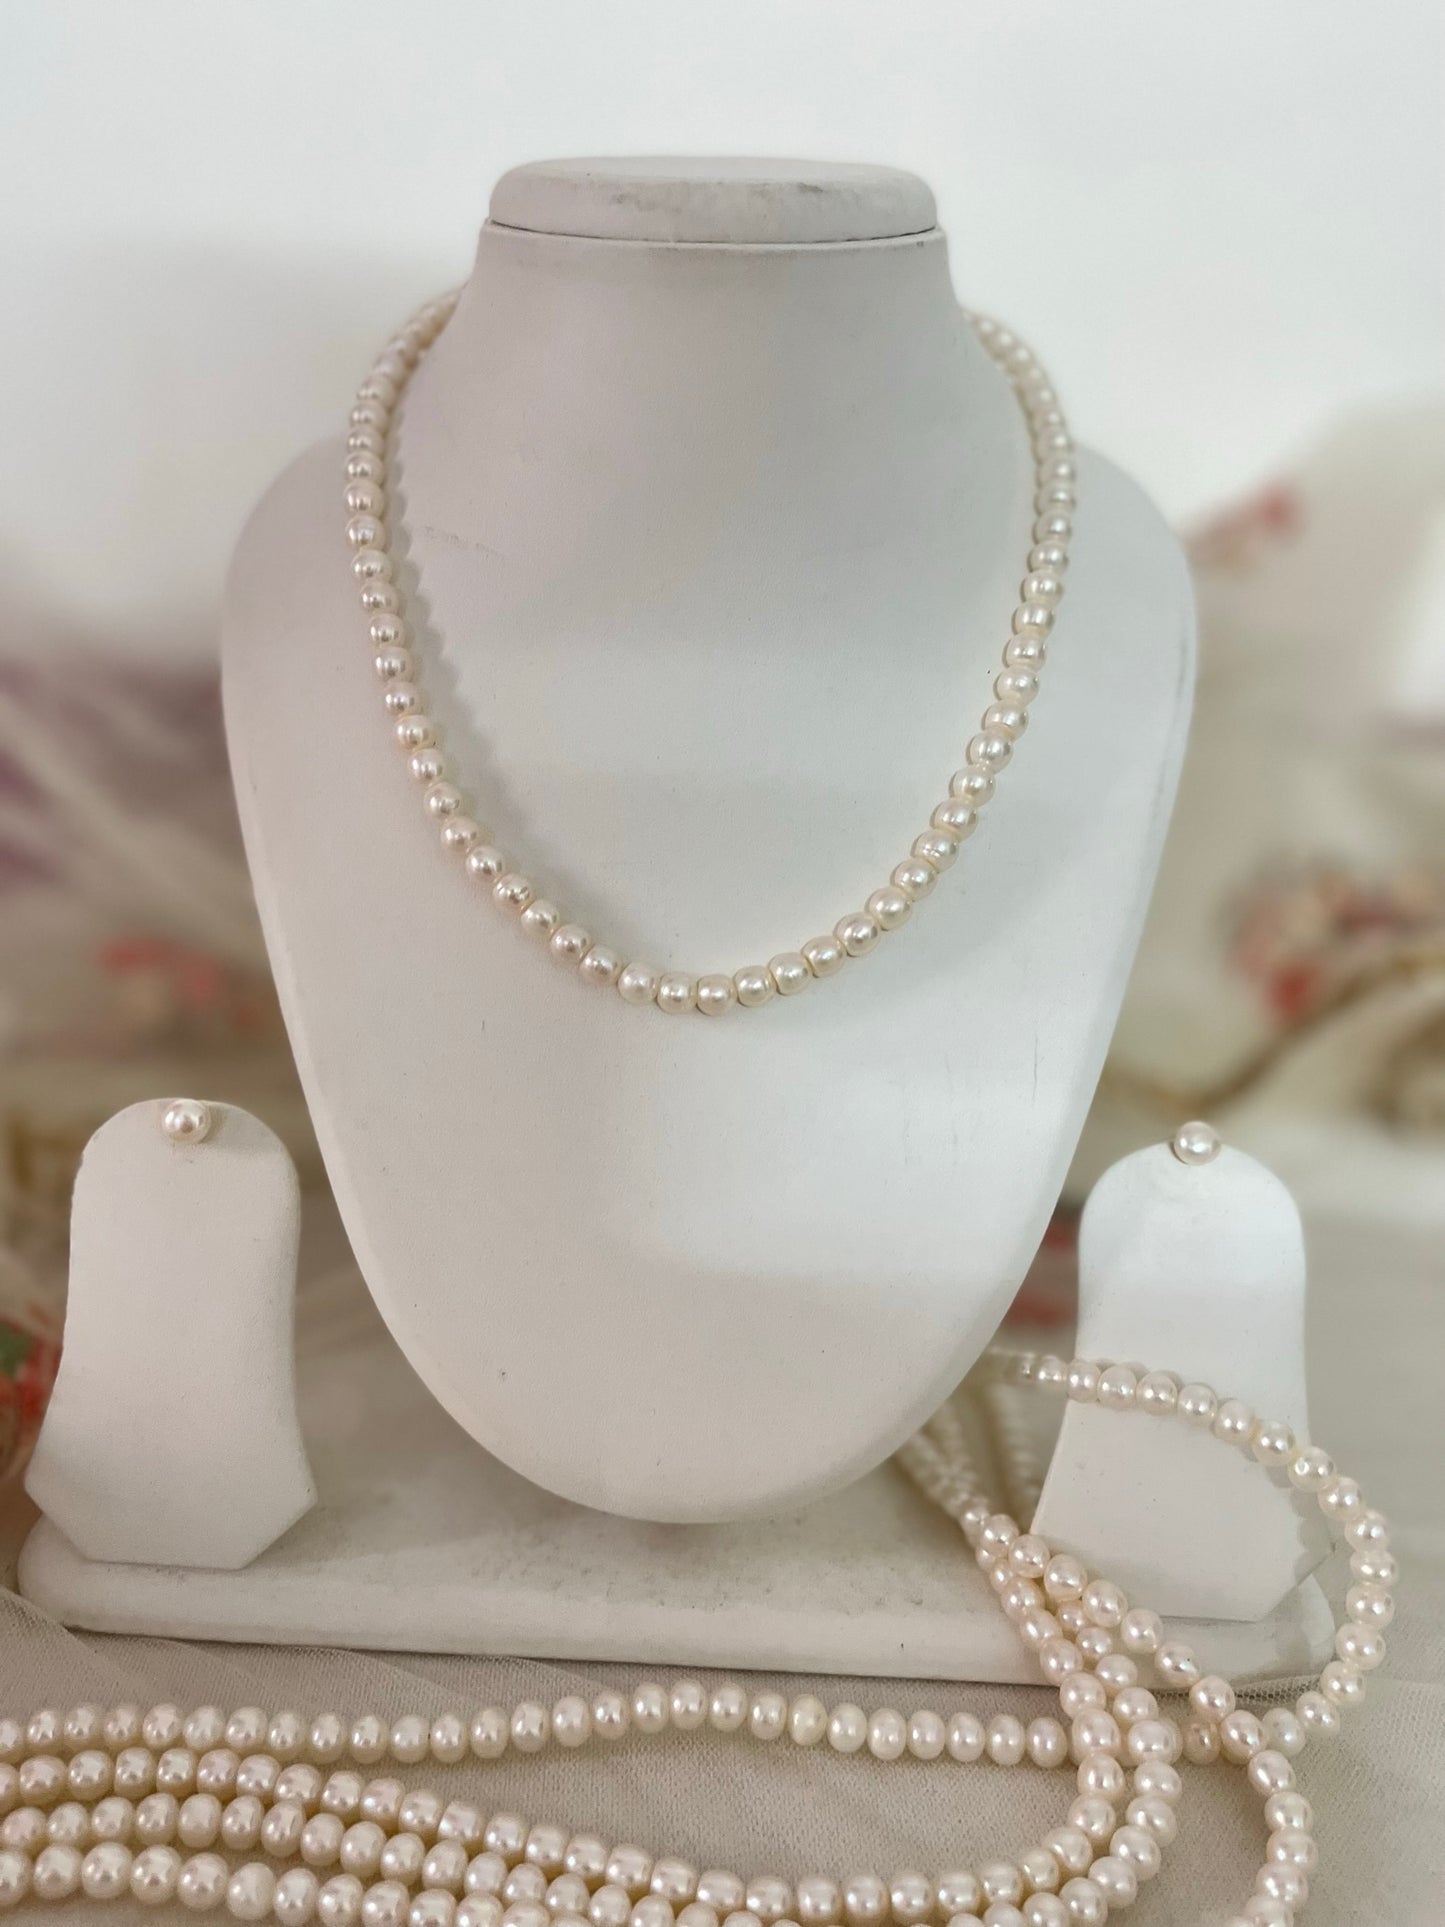 White Pearl necklace Set